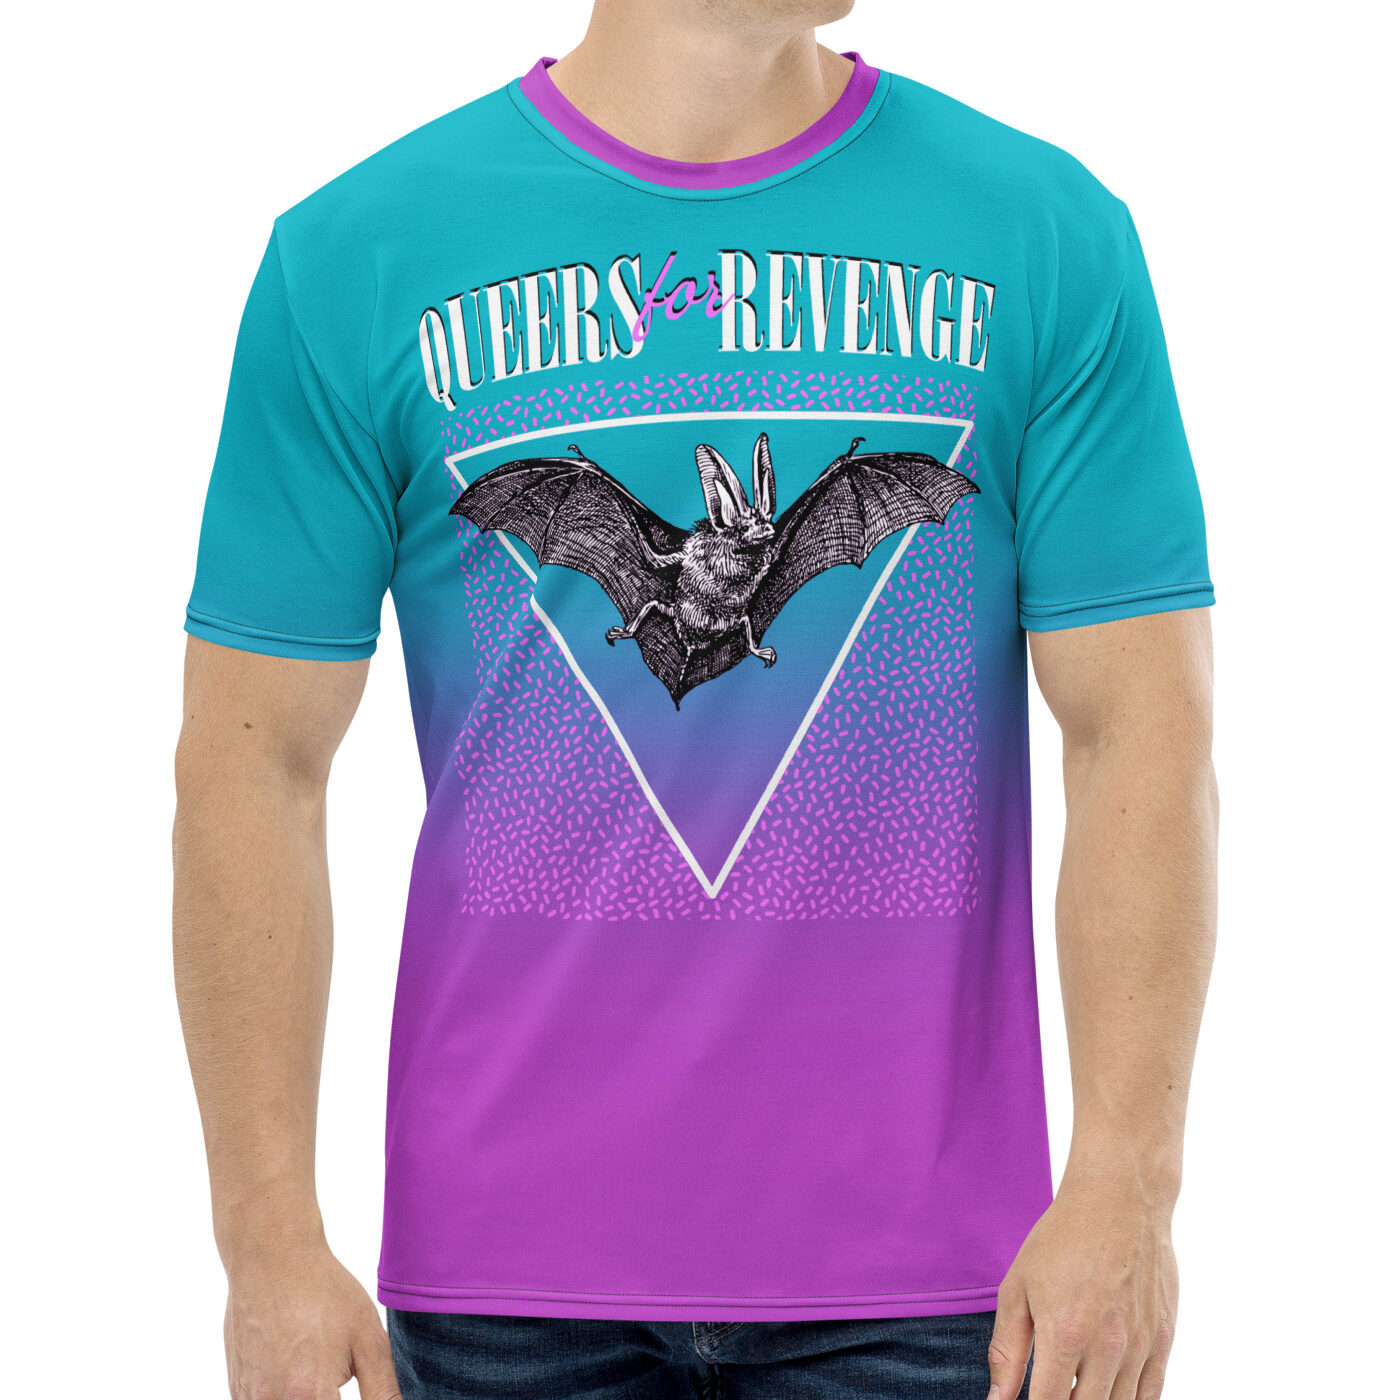 Featured image for “Queers for Revenge teal 90s - Men's t-shirt”